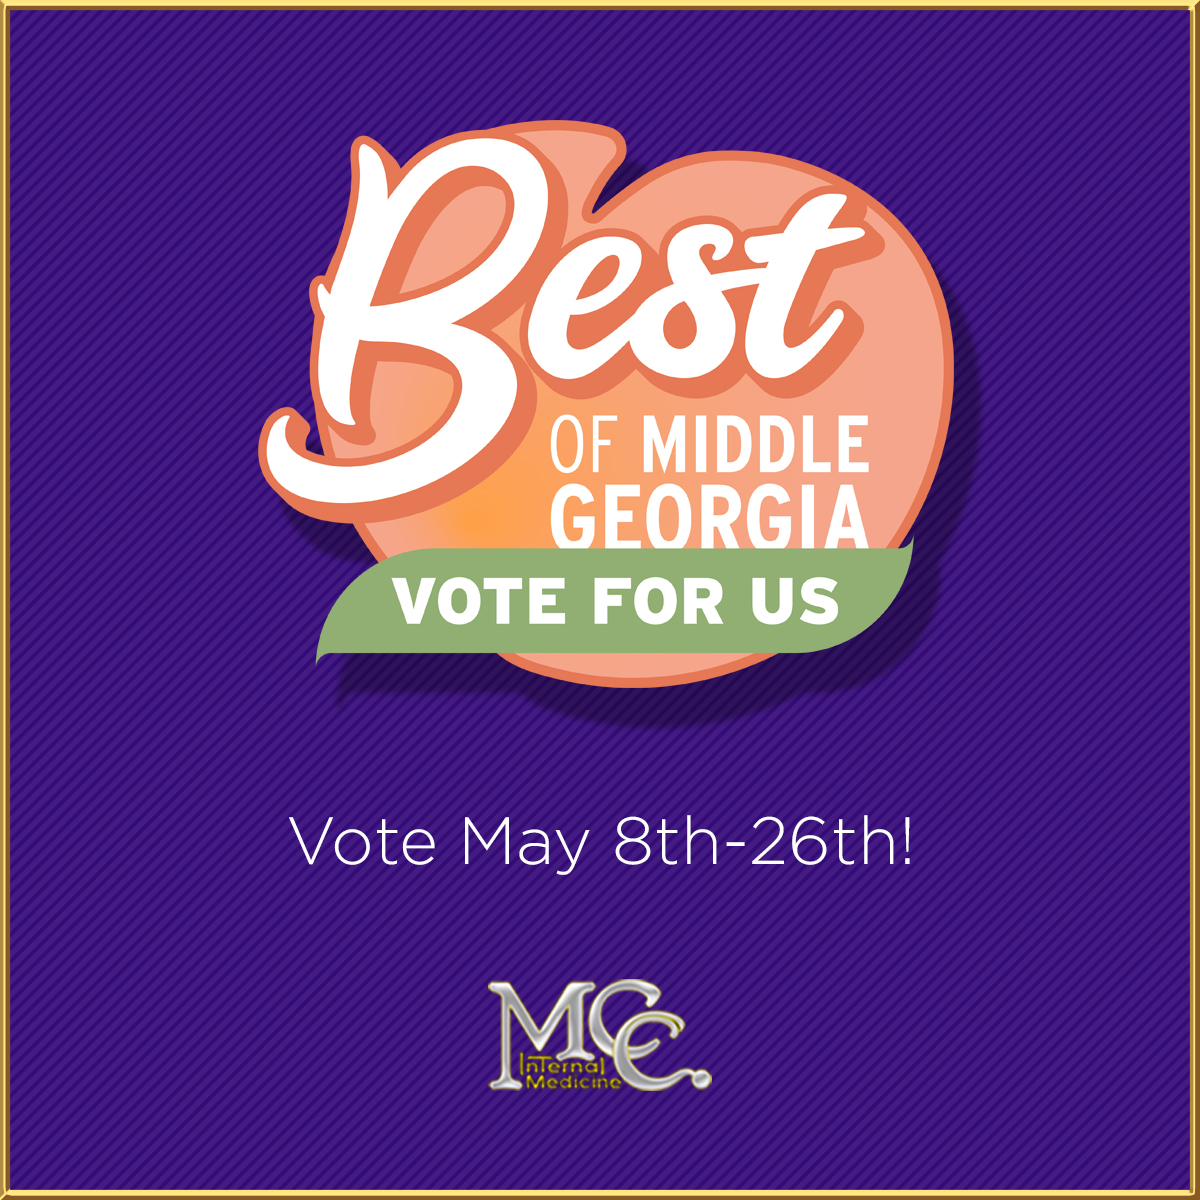 This the final week for VOTING for Best of Middle Georgia!

Cast your vote at votemiddlegeorgia.com.

You can vote once a day until May 26th.

Thank you so much!

#BestofMiddleGeorgia #internalmedicine #healthcare #doctors #middlegeorgia #maconga #physicians